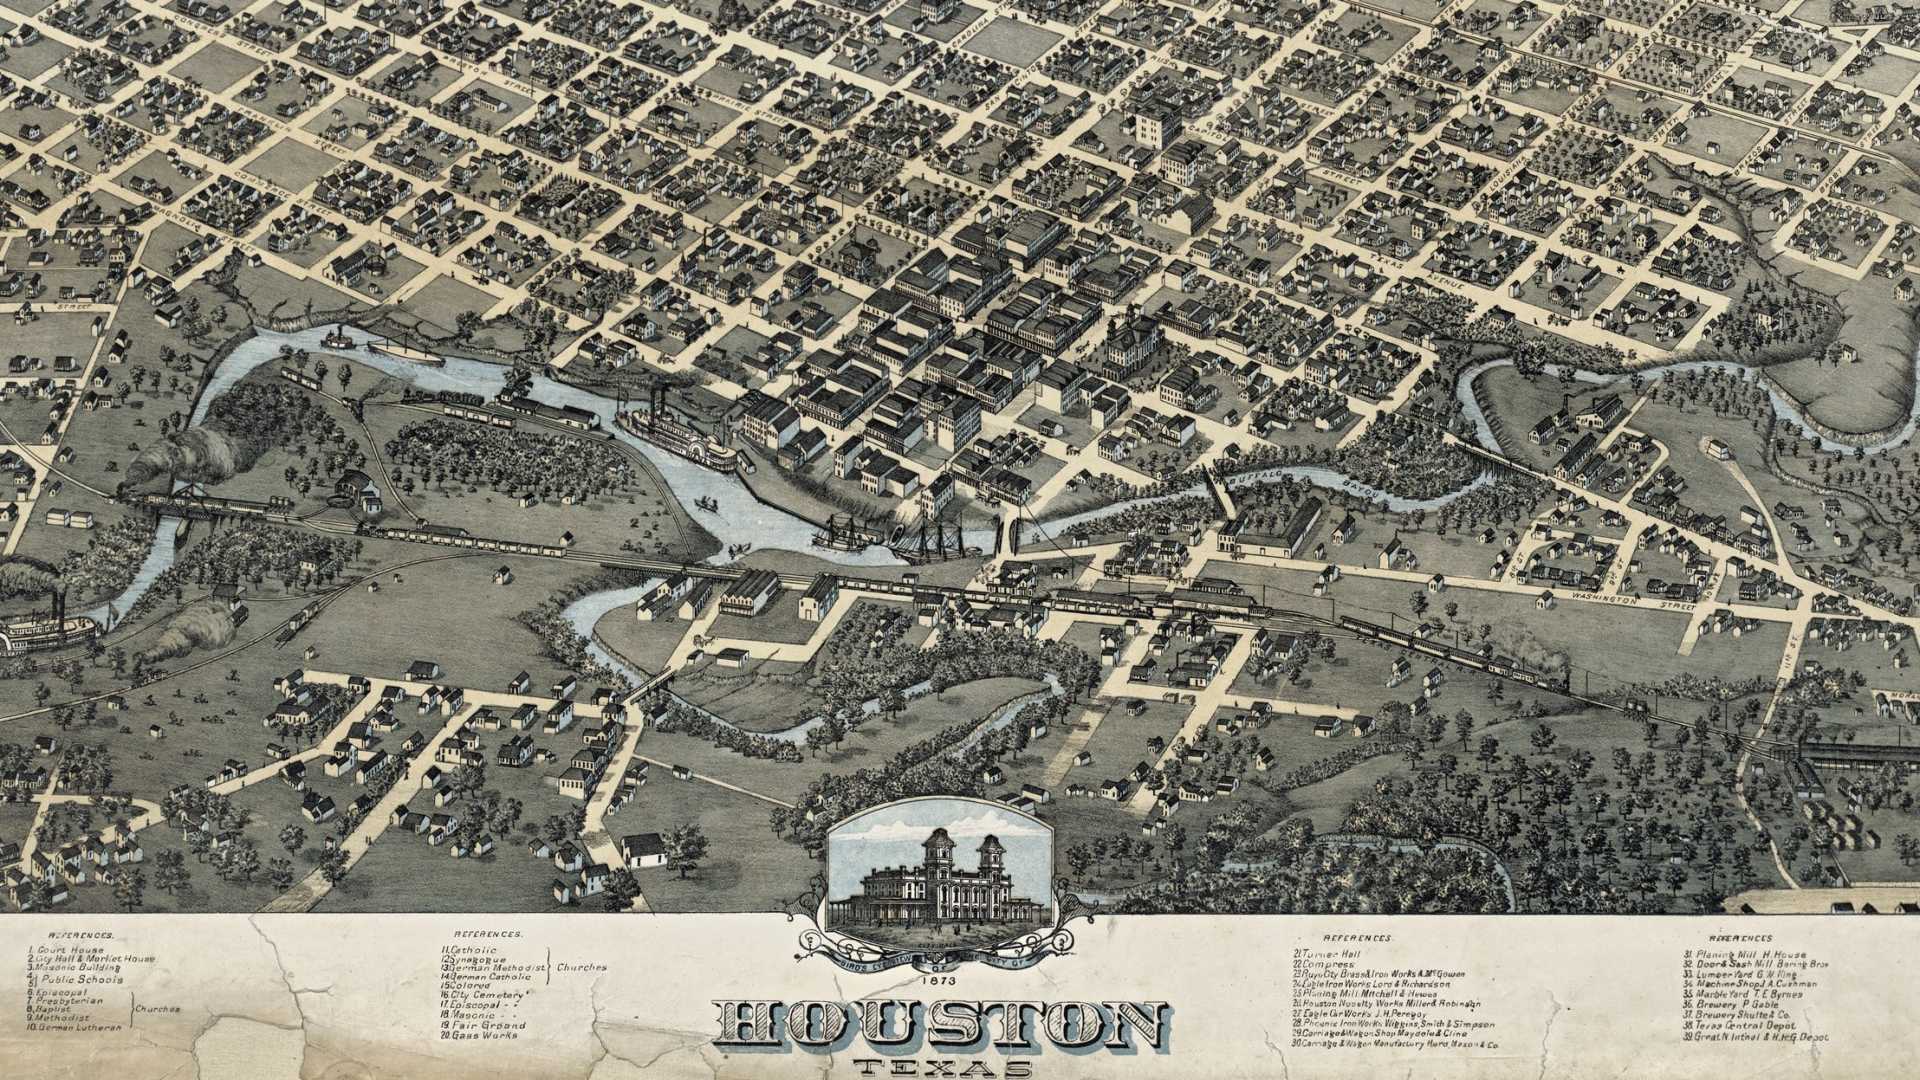 Old map of Houston 